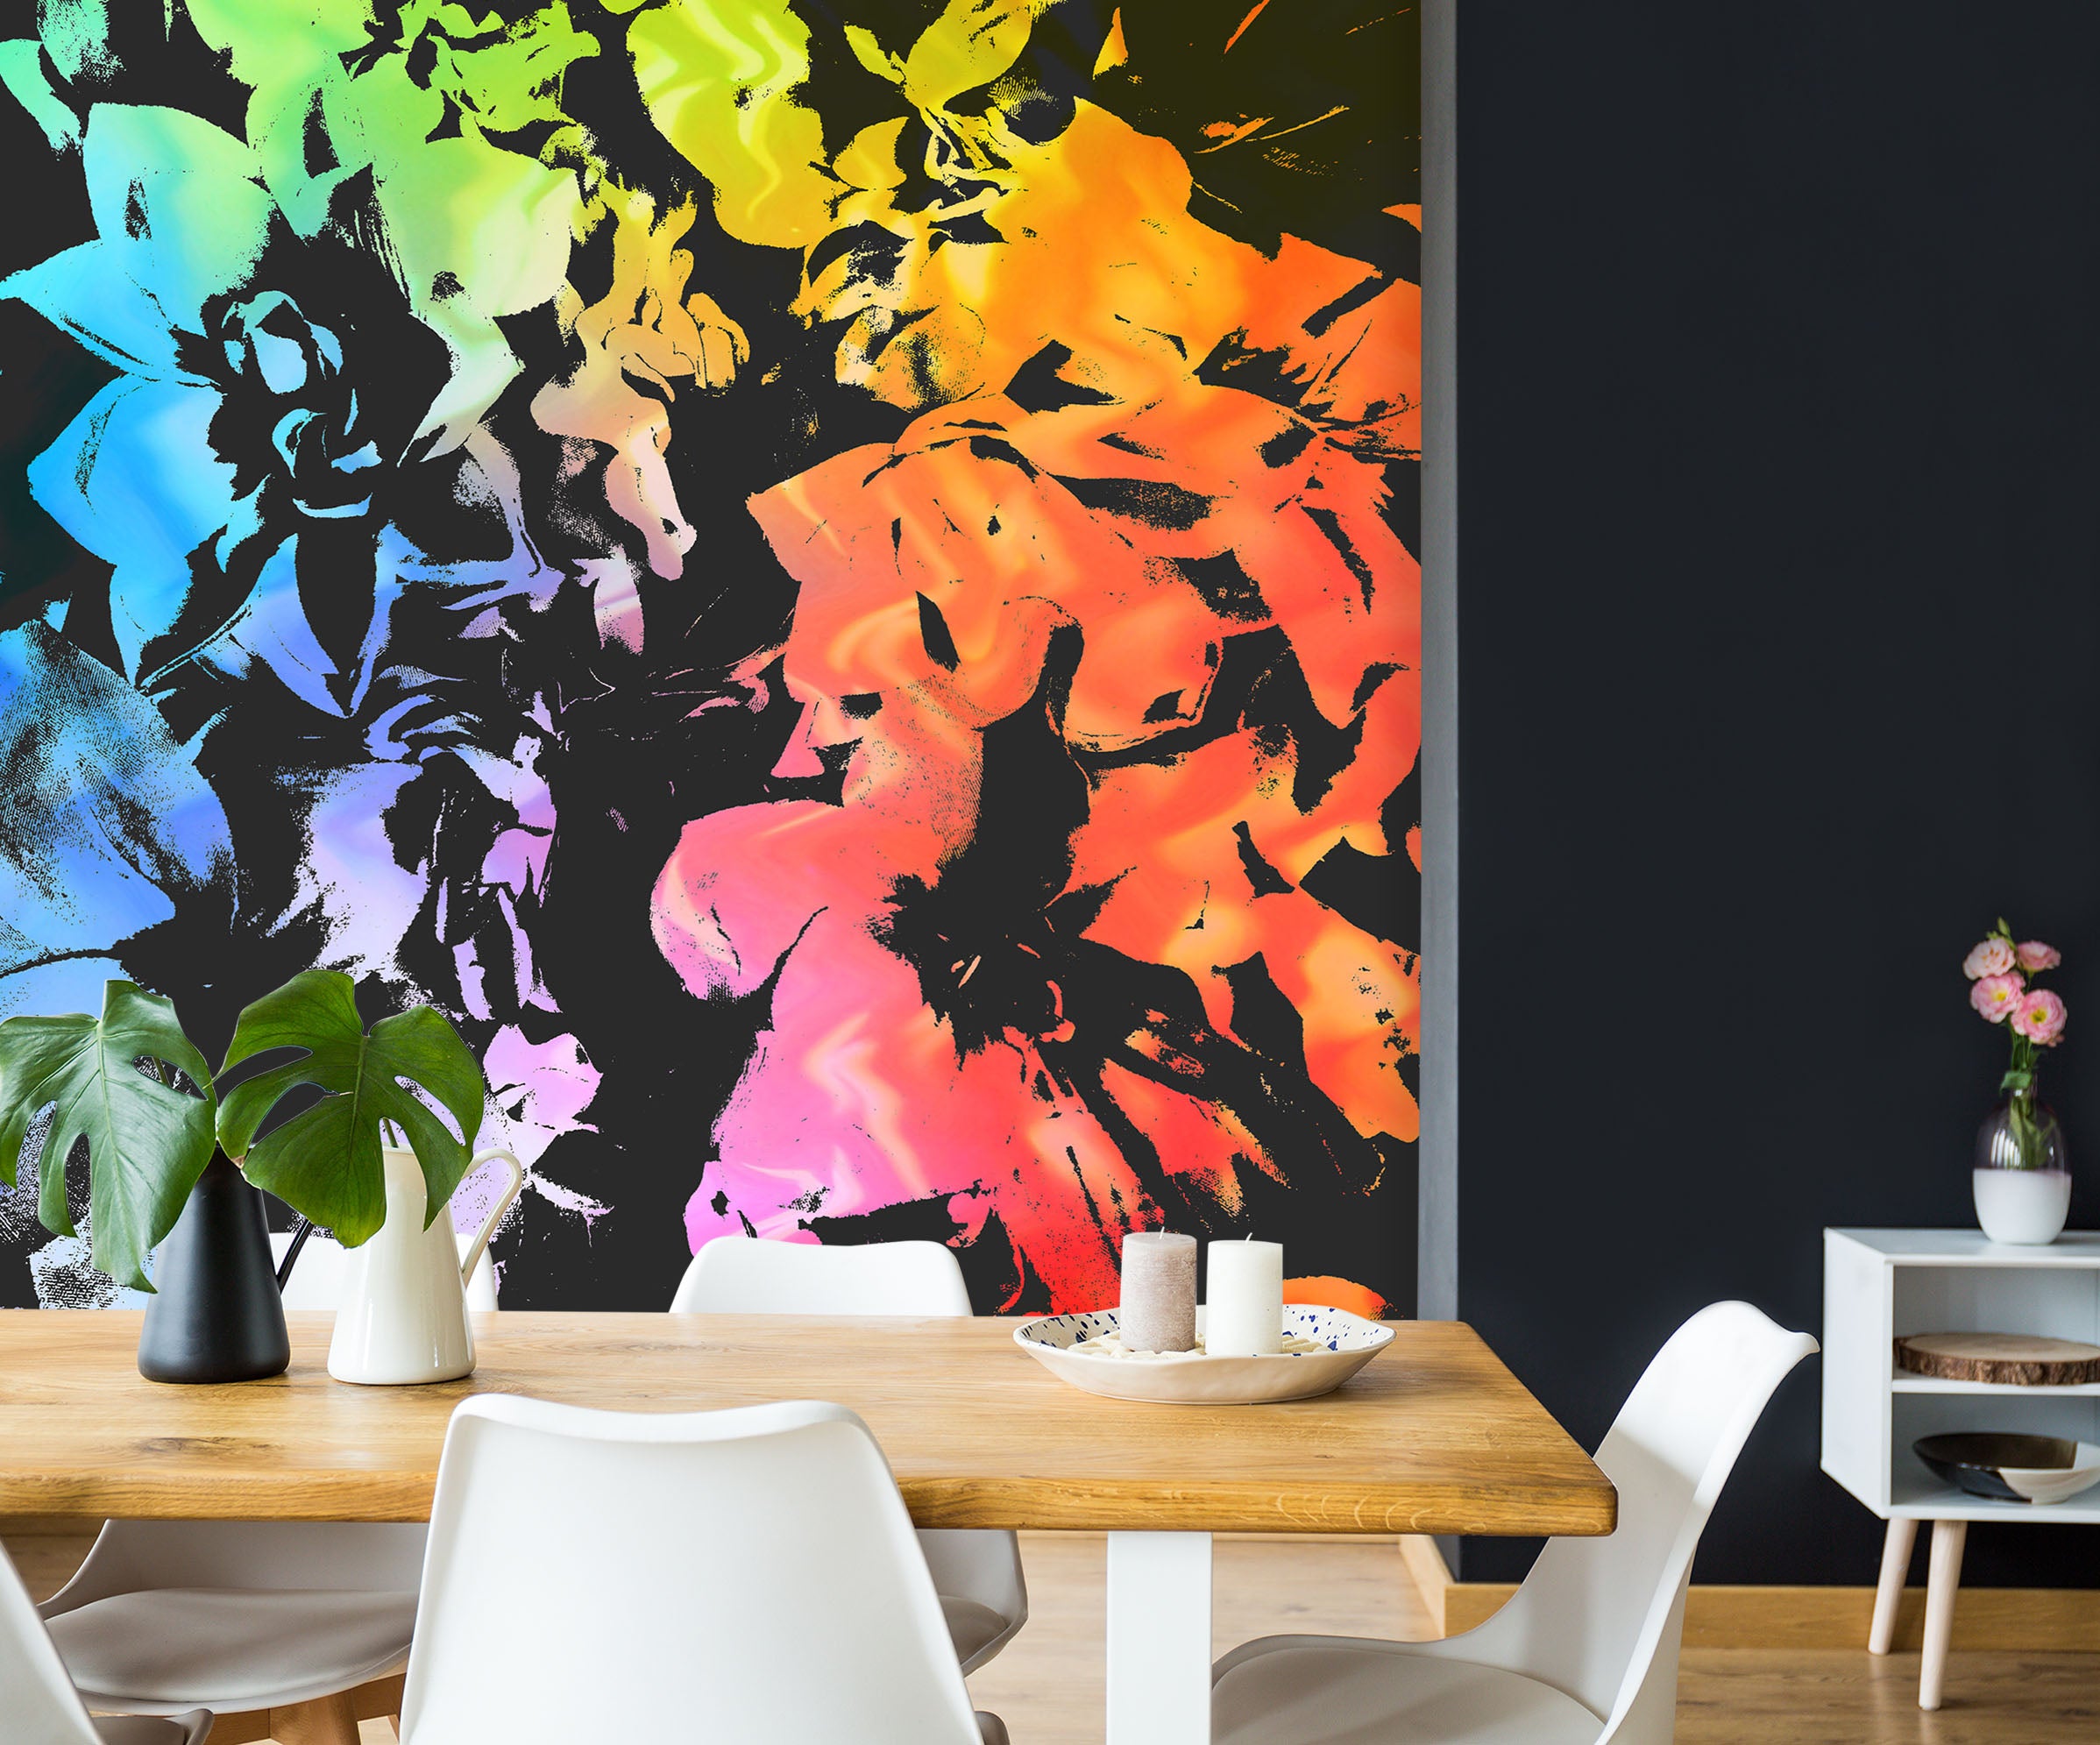 3D Colorful 19112 Shandra Smith Wall Mural Wall Murals